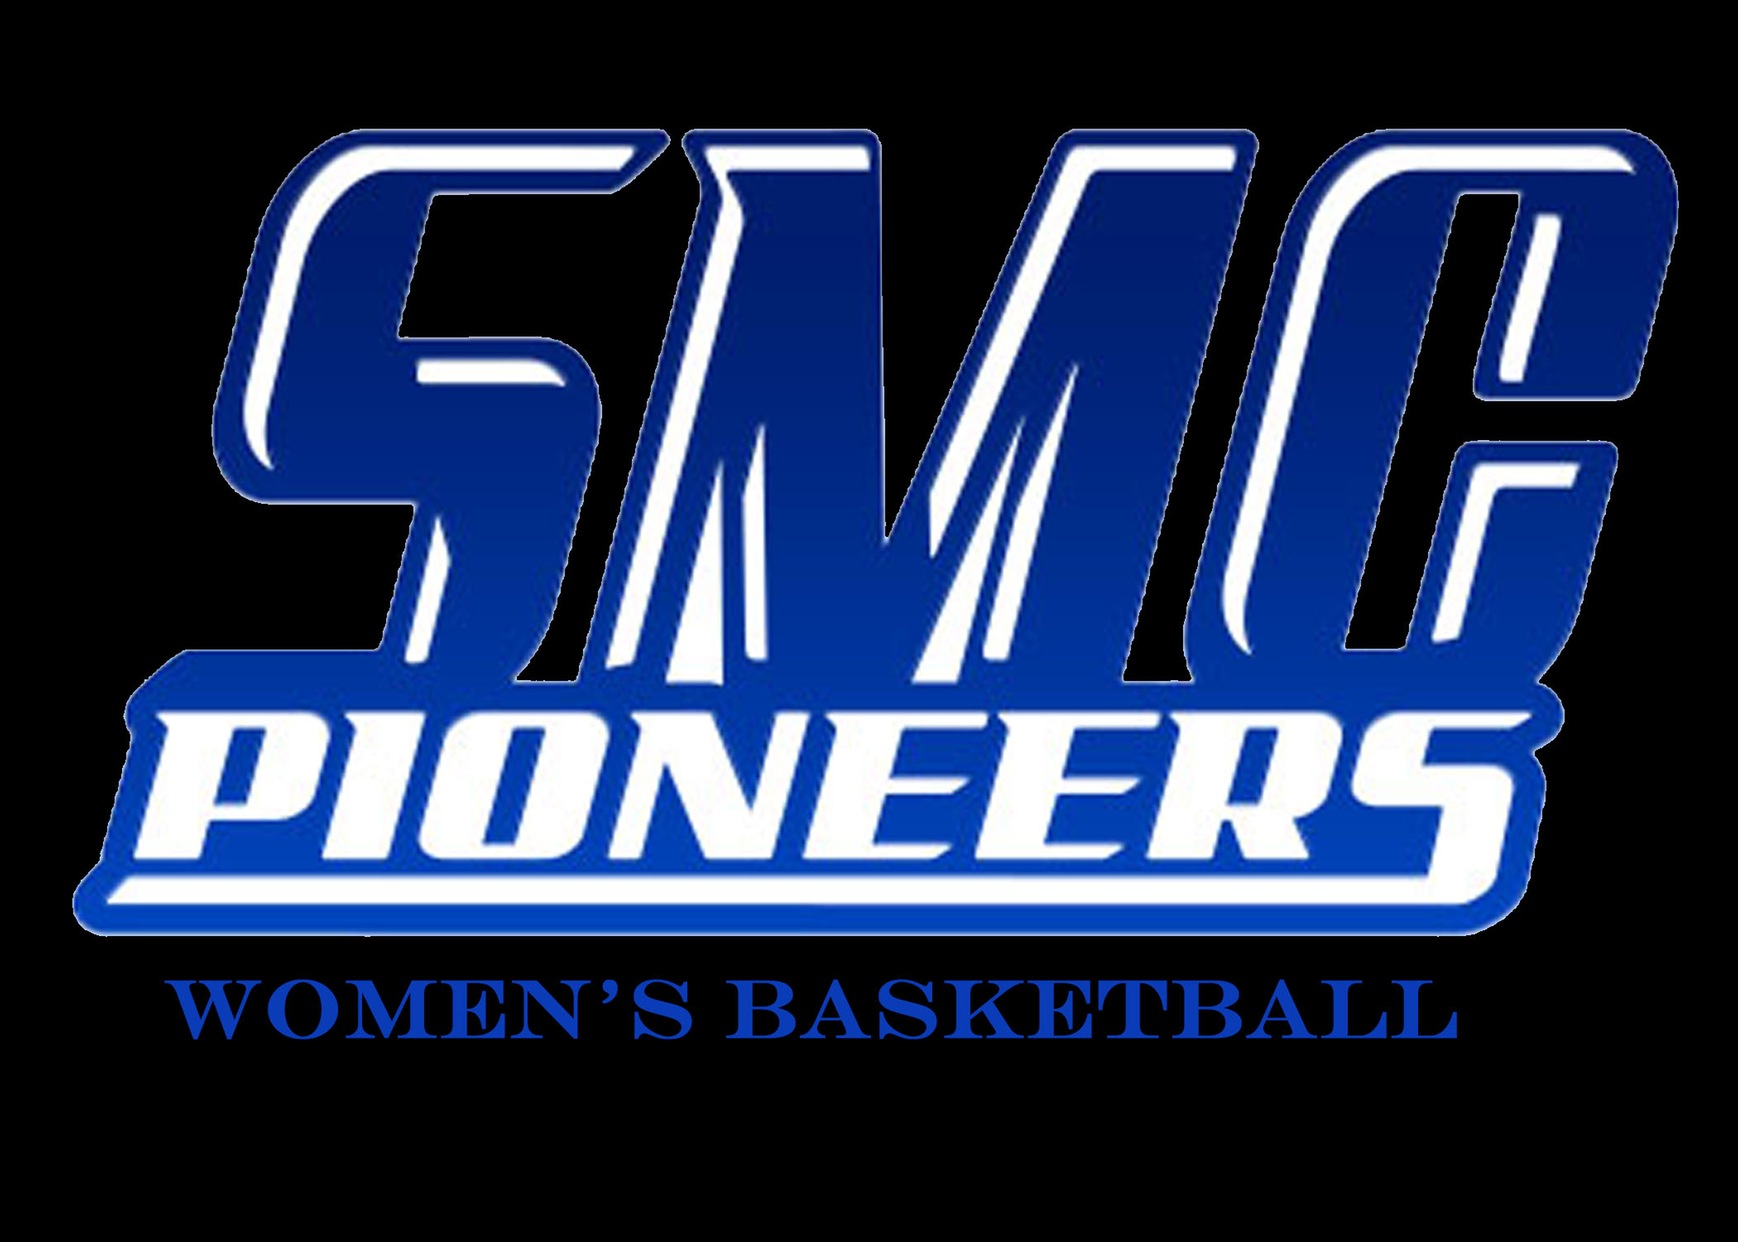 Lady Pioneers Lose to #9 Walters State